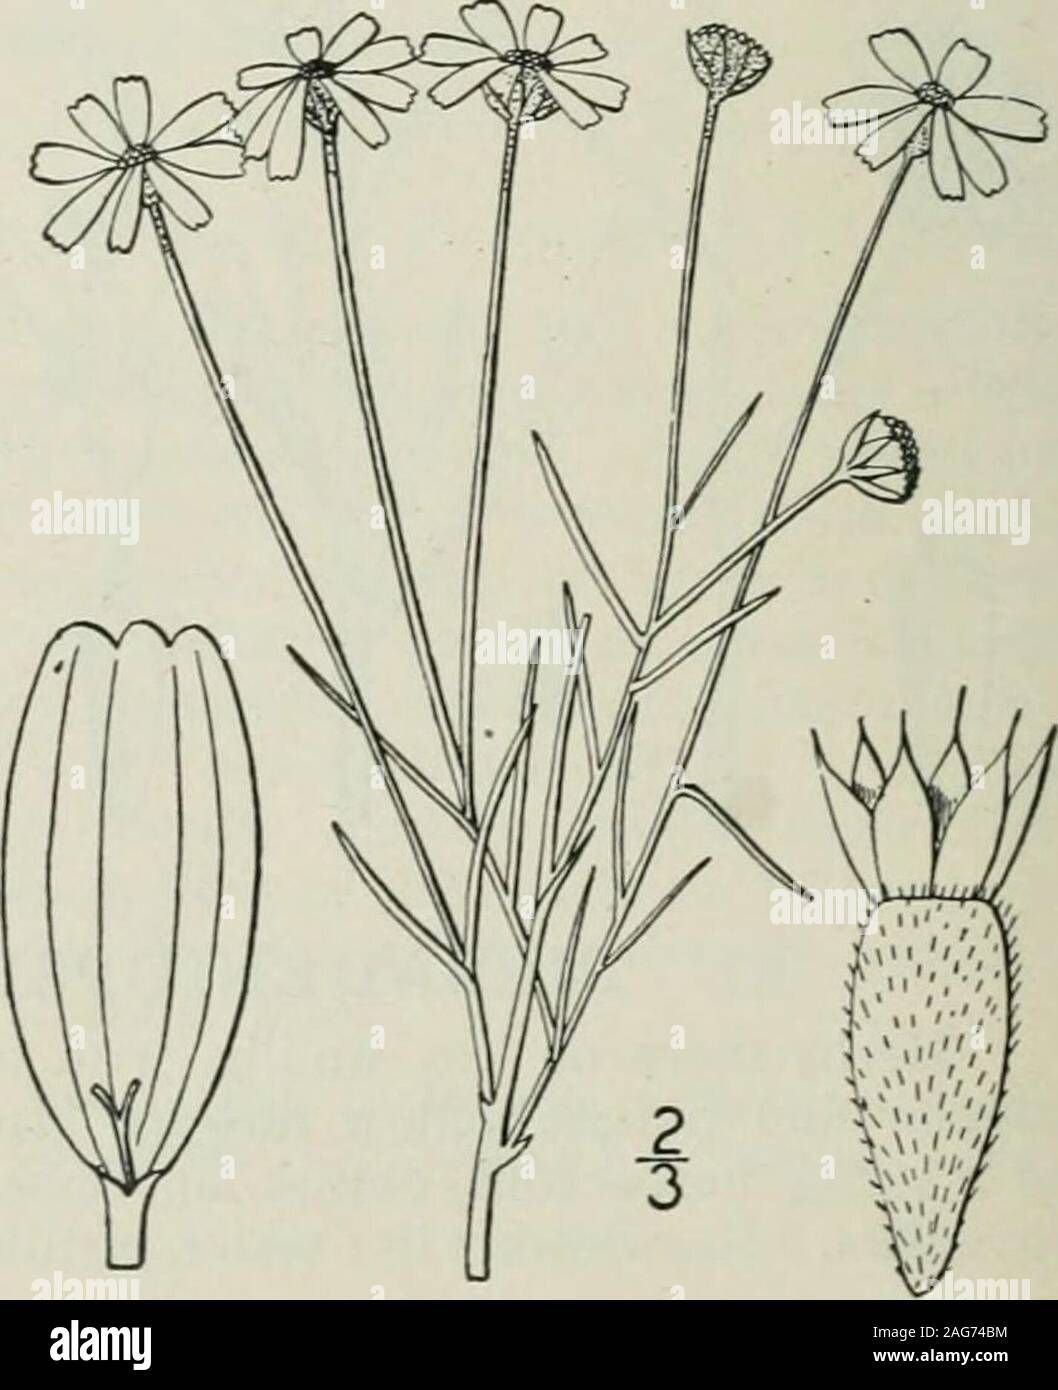 . An illustrated flora of the northern United States, Canada and the British possessions : from Newfoundland to the parallel of the southern boundary of Virginia and from the Atlantic Ocean westward to the 102nd meridian. o spatulate ; branches of the caudex short and thick. Bracts of the involucre acutish. 3- T. acaulis. Bracts of the involucre obtuse, rounded. 4- T- herbacea. I. Tetraneuris linearifolia (Hook.) Greene.Fine-leaved Tetraneuris. Fig. 4537- Hymenoxys linearifolia Hook. Icon. pi. 146. 1837.Actinella linearifolia T. & G. Fl. X. A. 2: 383. 1842.T. linearifolia Greene, Pittonia 3: 3 Stock Photo